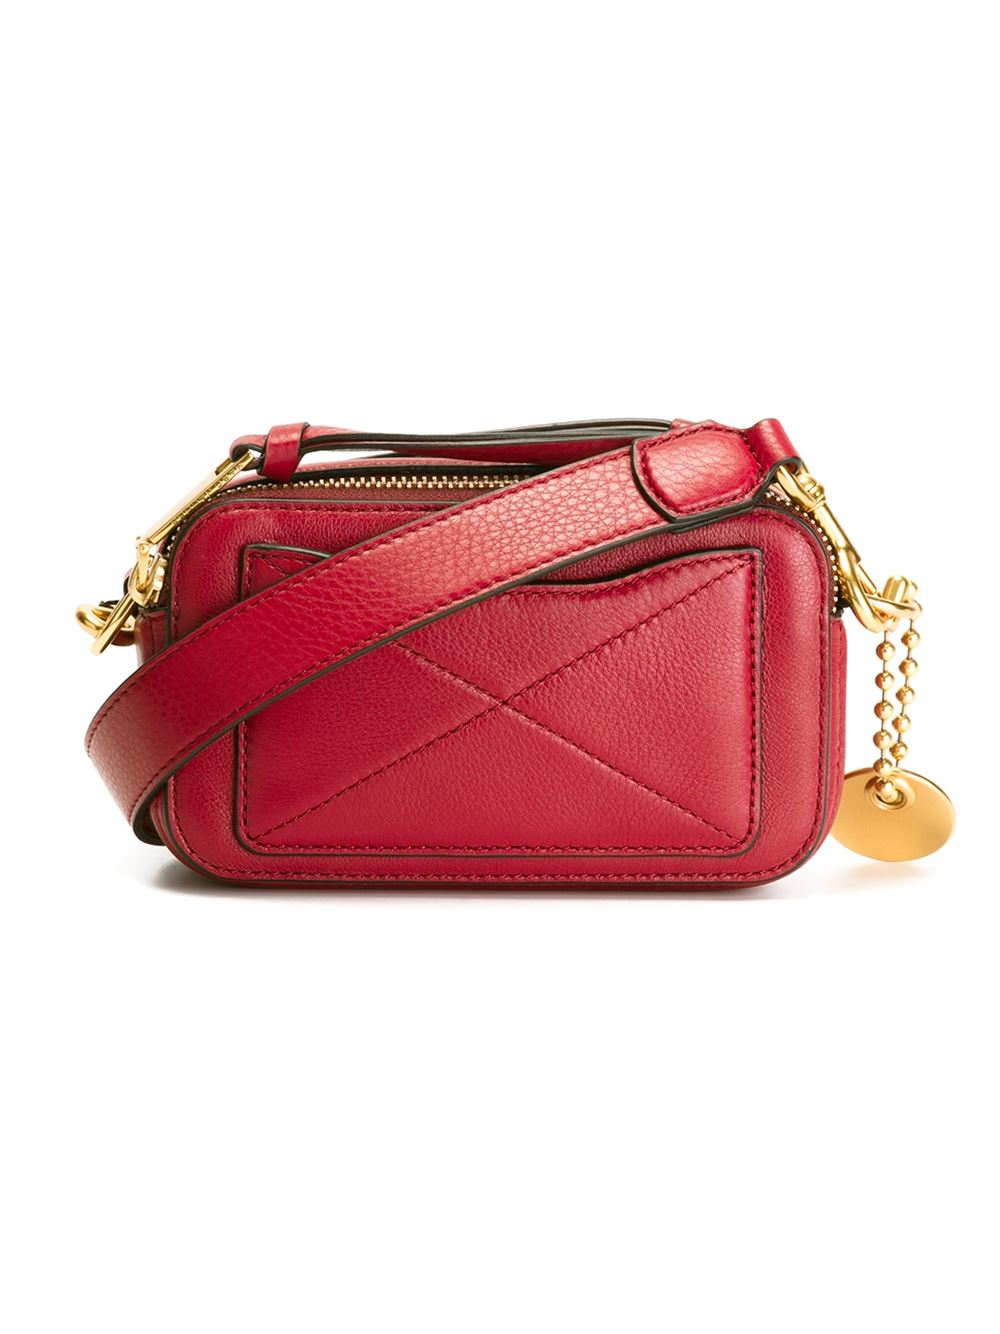 Marc Jacobs Recruit Camera Bag in Red - Lyst